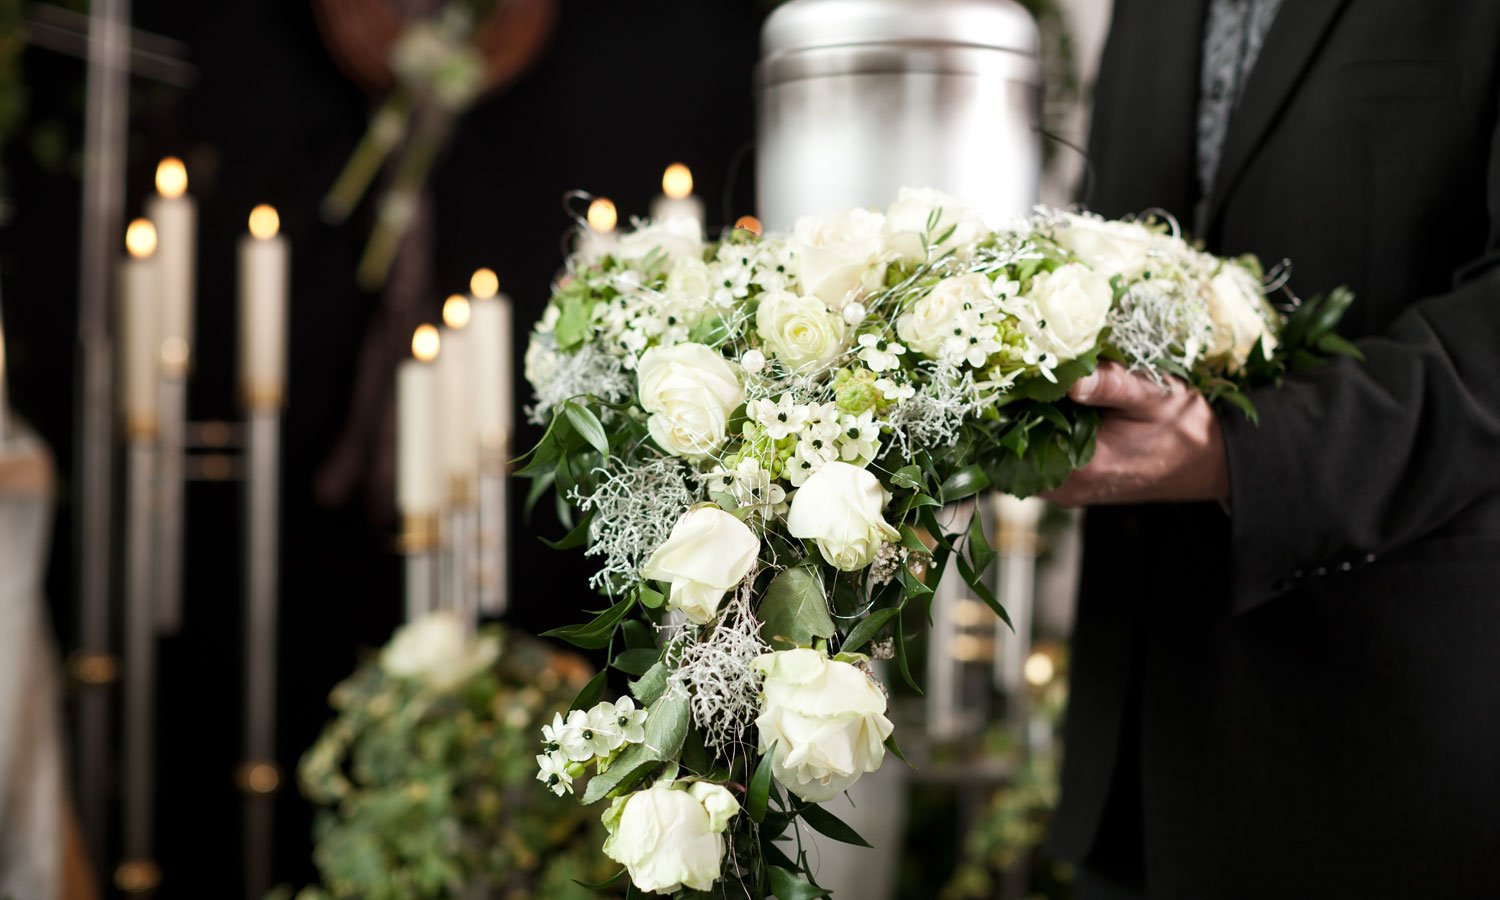 What You Might Not Be Aware Of When Planning A Funeral